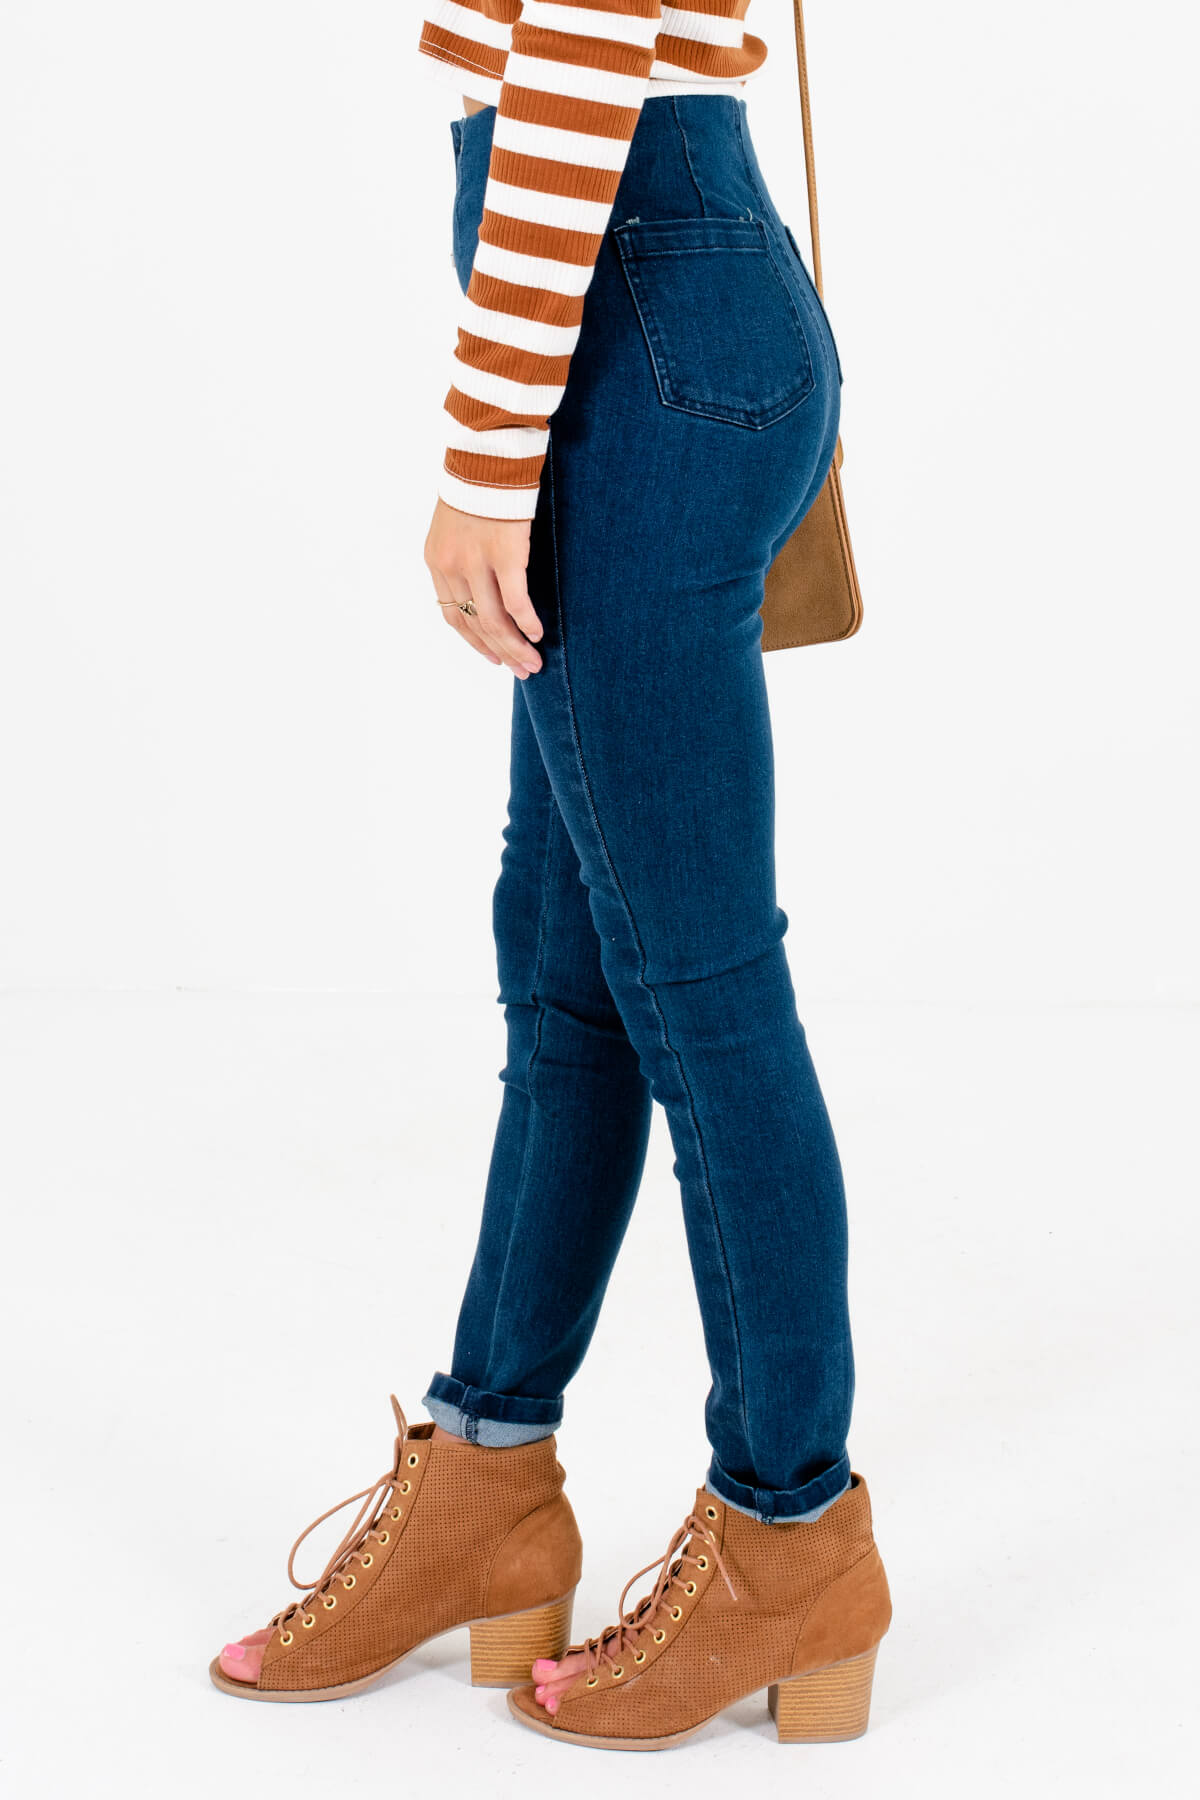 Dark Wash Blue High-Quality Material Boutique Jeans for Women